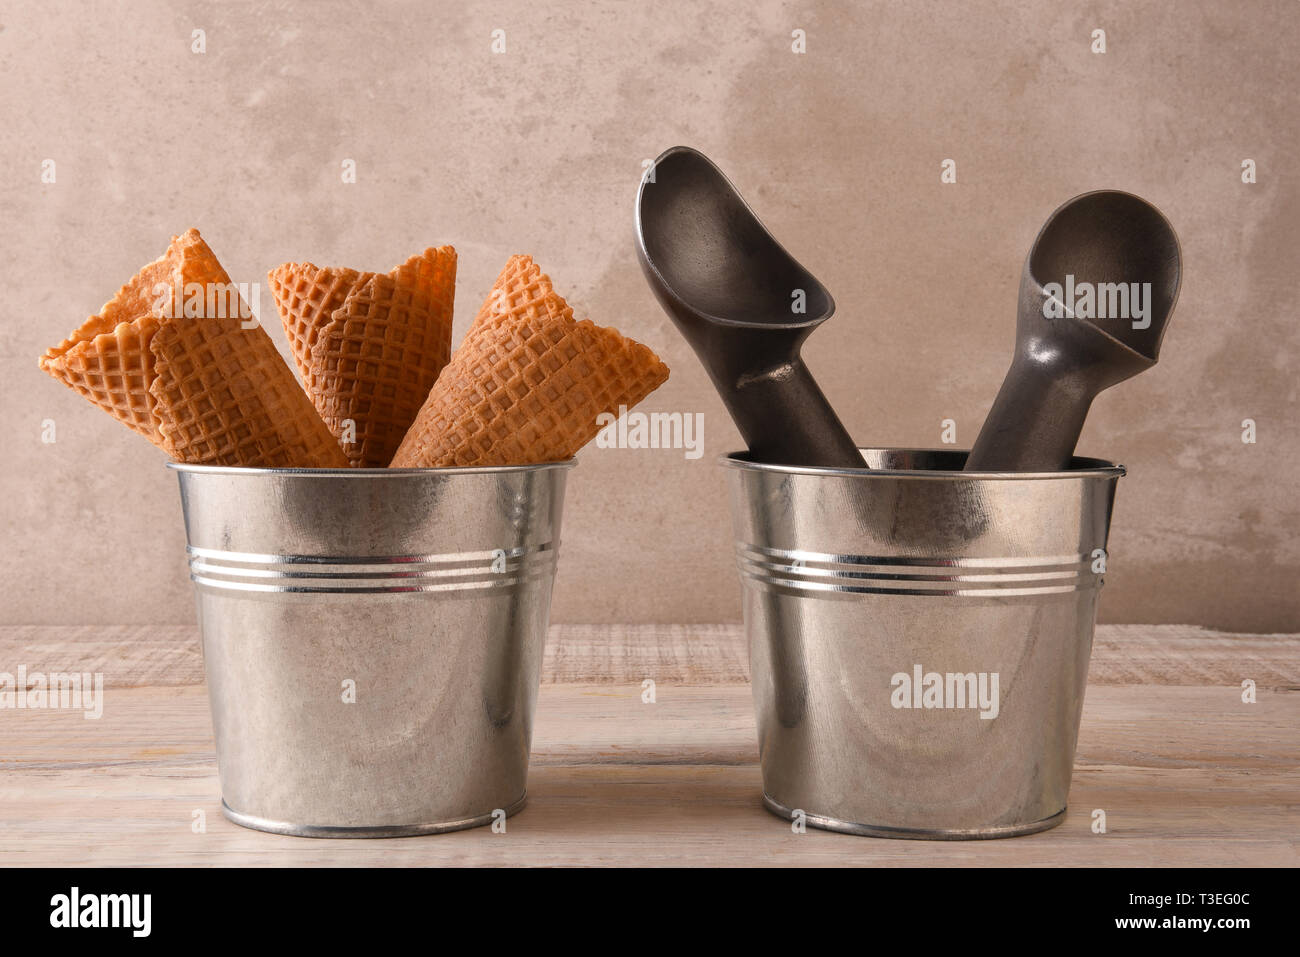 Closeup of three ice cream cones in a small metal bucket next to a pail with two scoops. Stock Photo